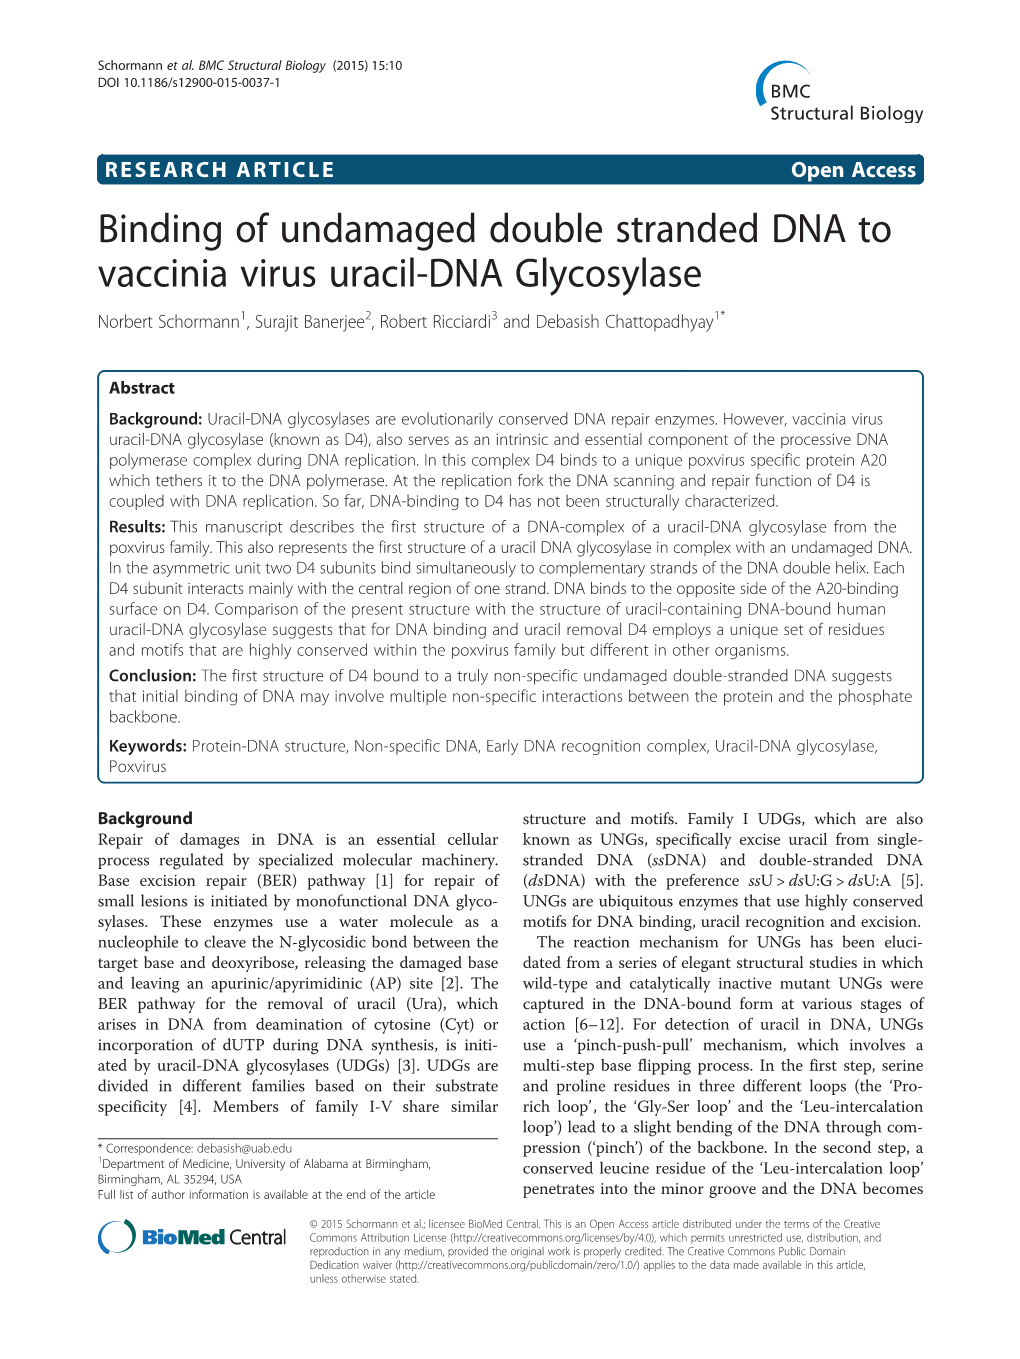 Binding of Undamaged Double Stranded DNA to Vaccinia Virus